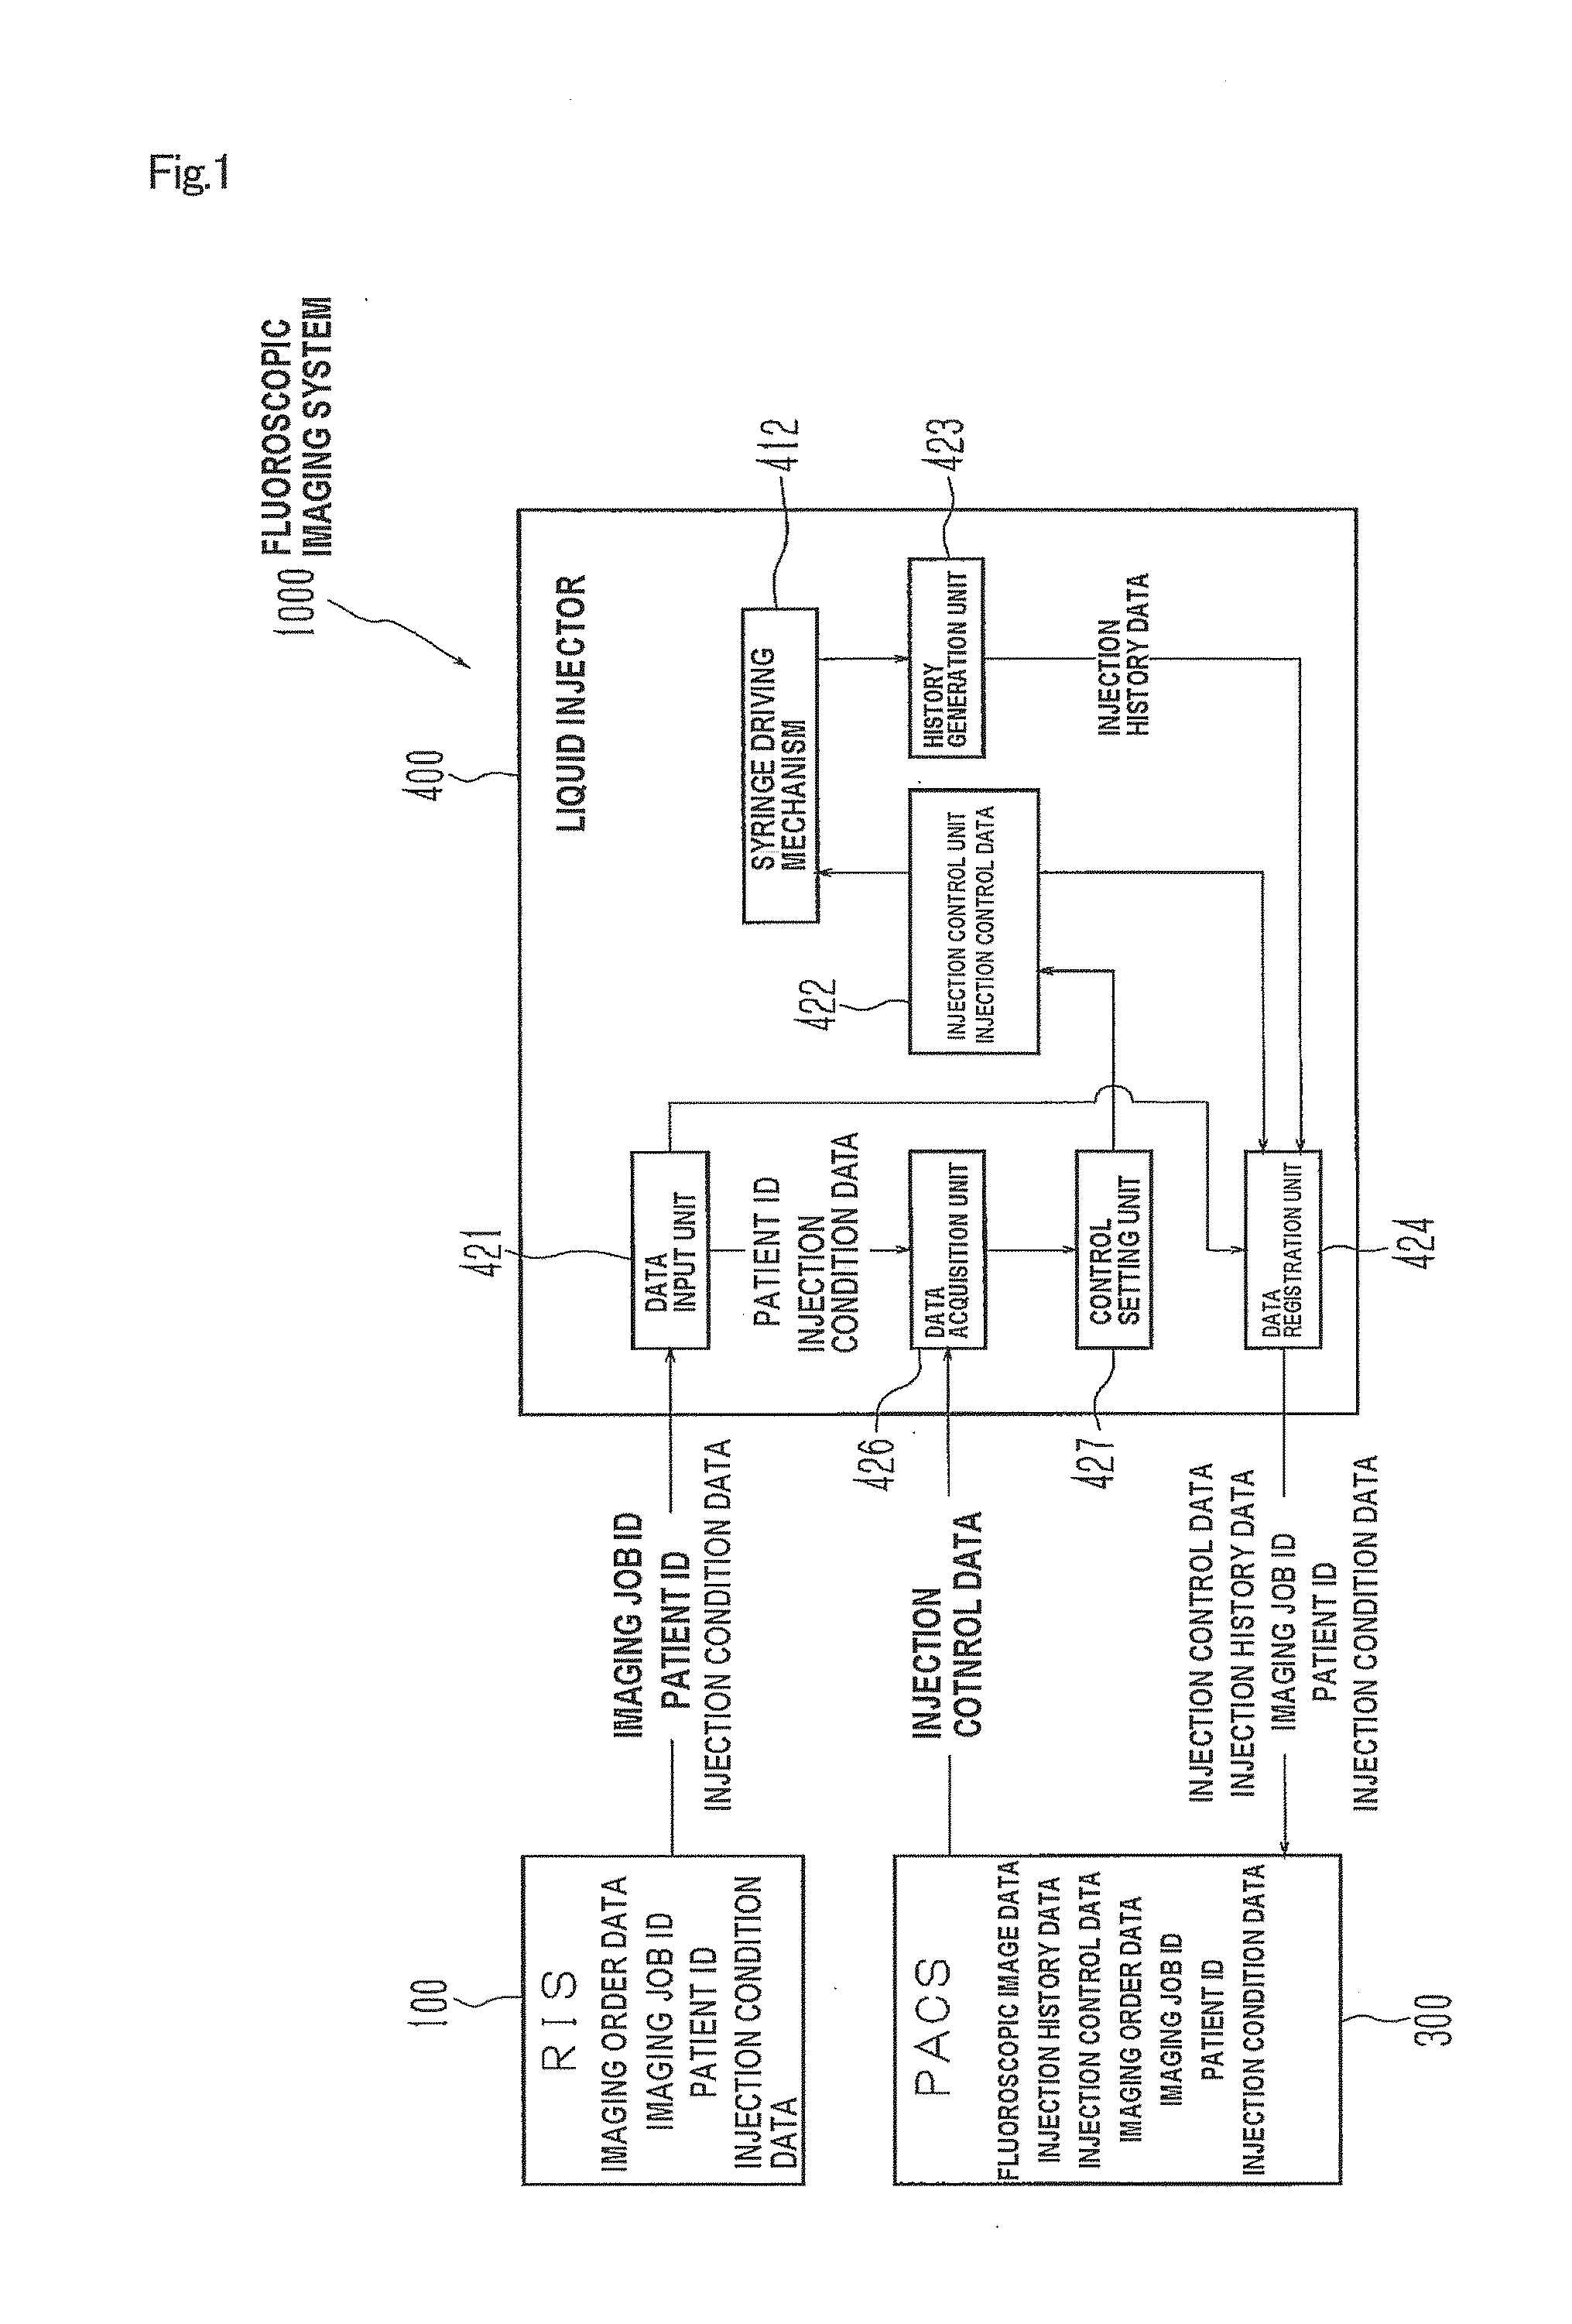 Liquid injector, fluoroscopic imaging system, and computer program